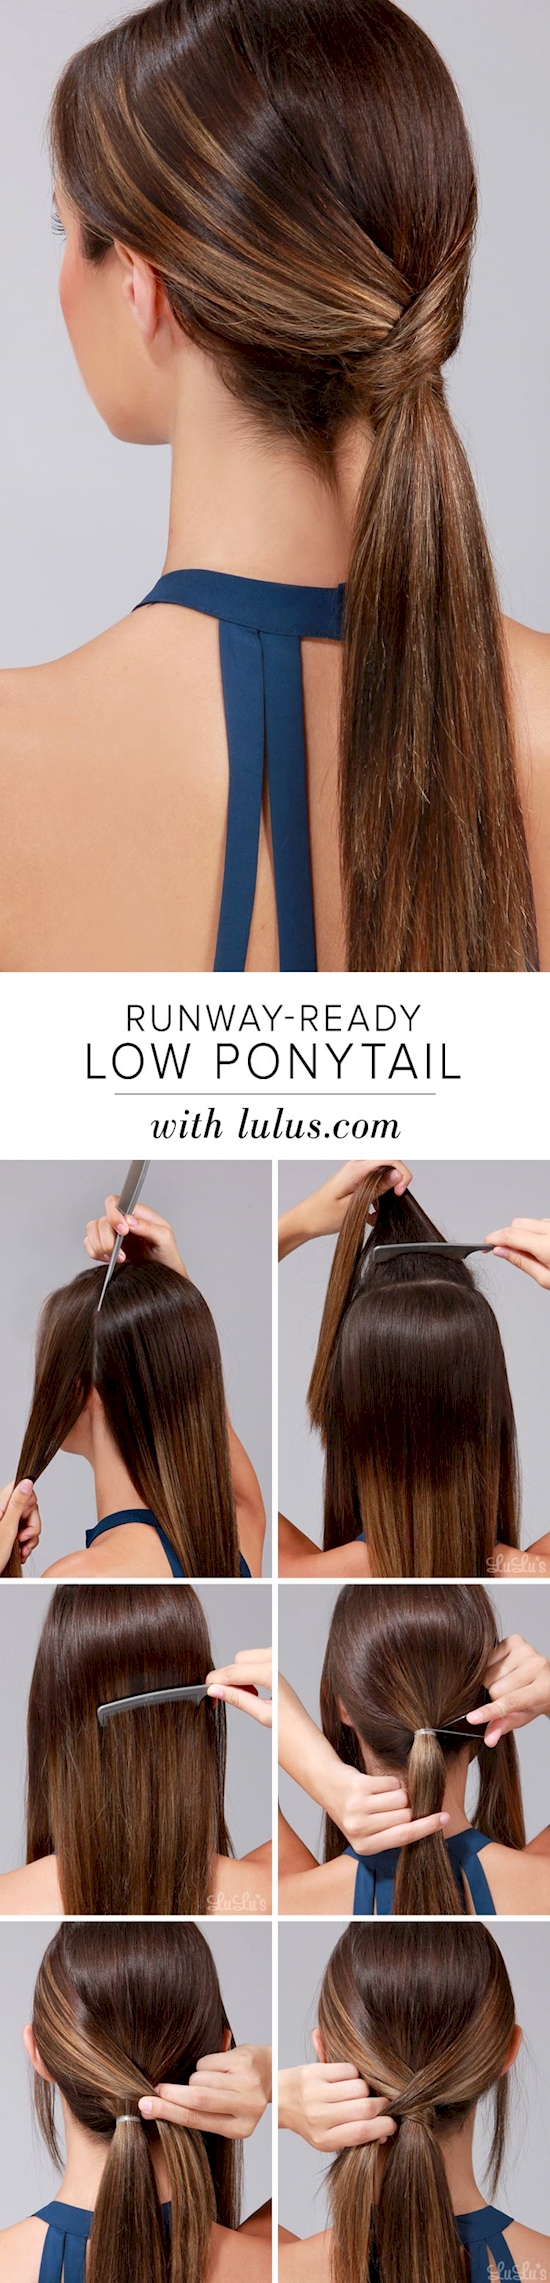 By first dividing your hair into three parts, you can create a luscious low ponytail.